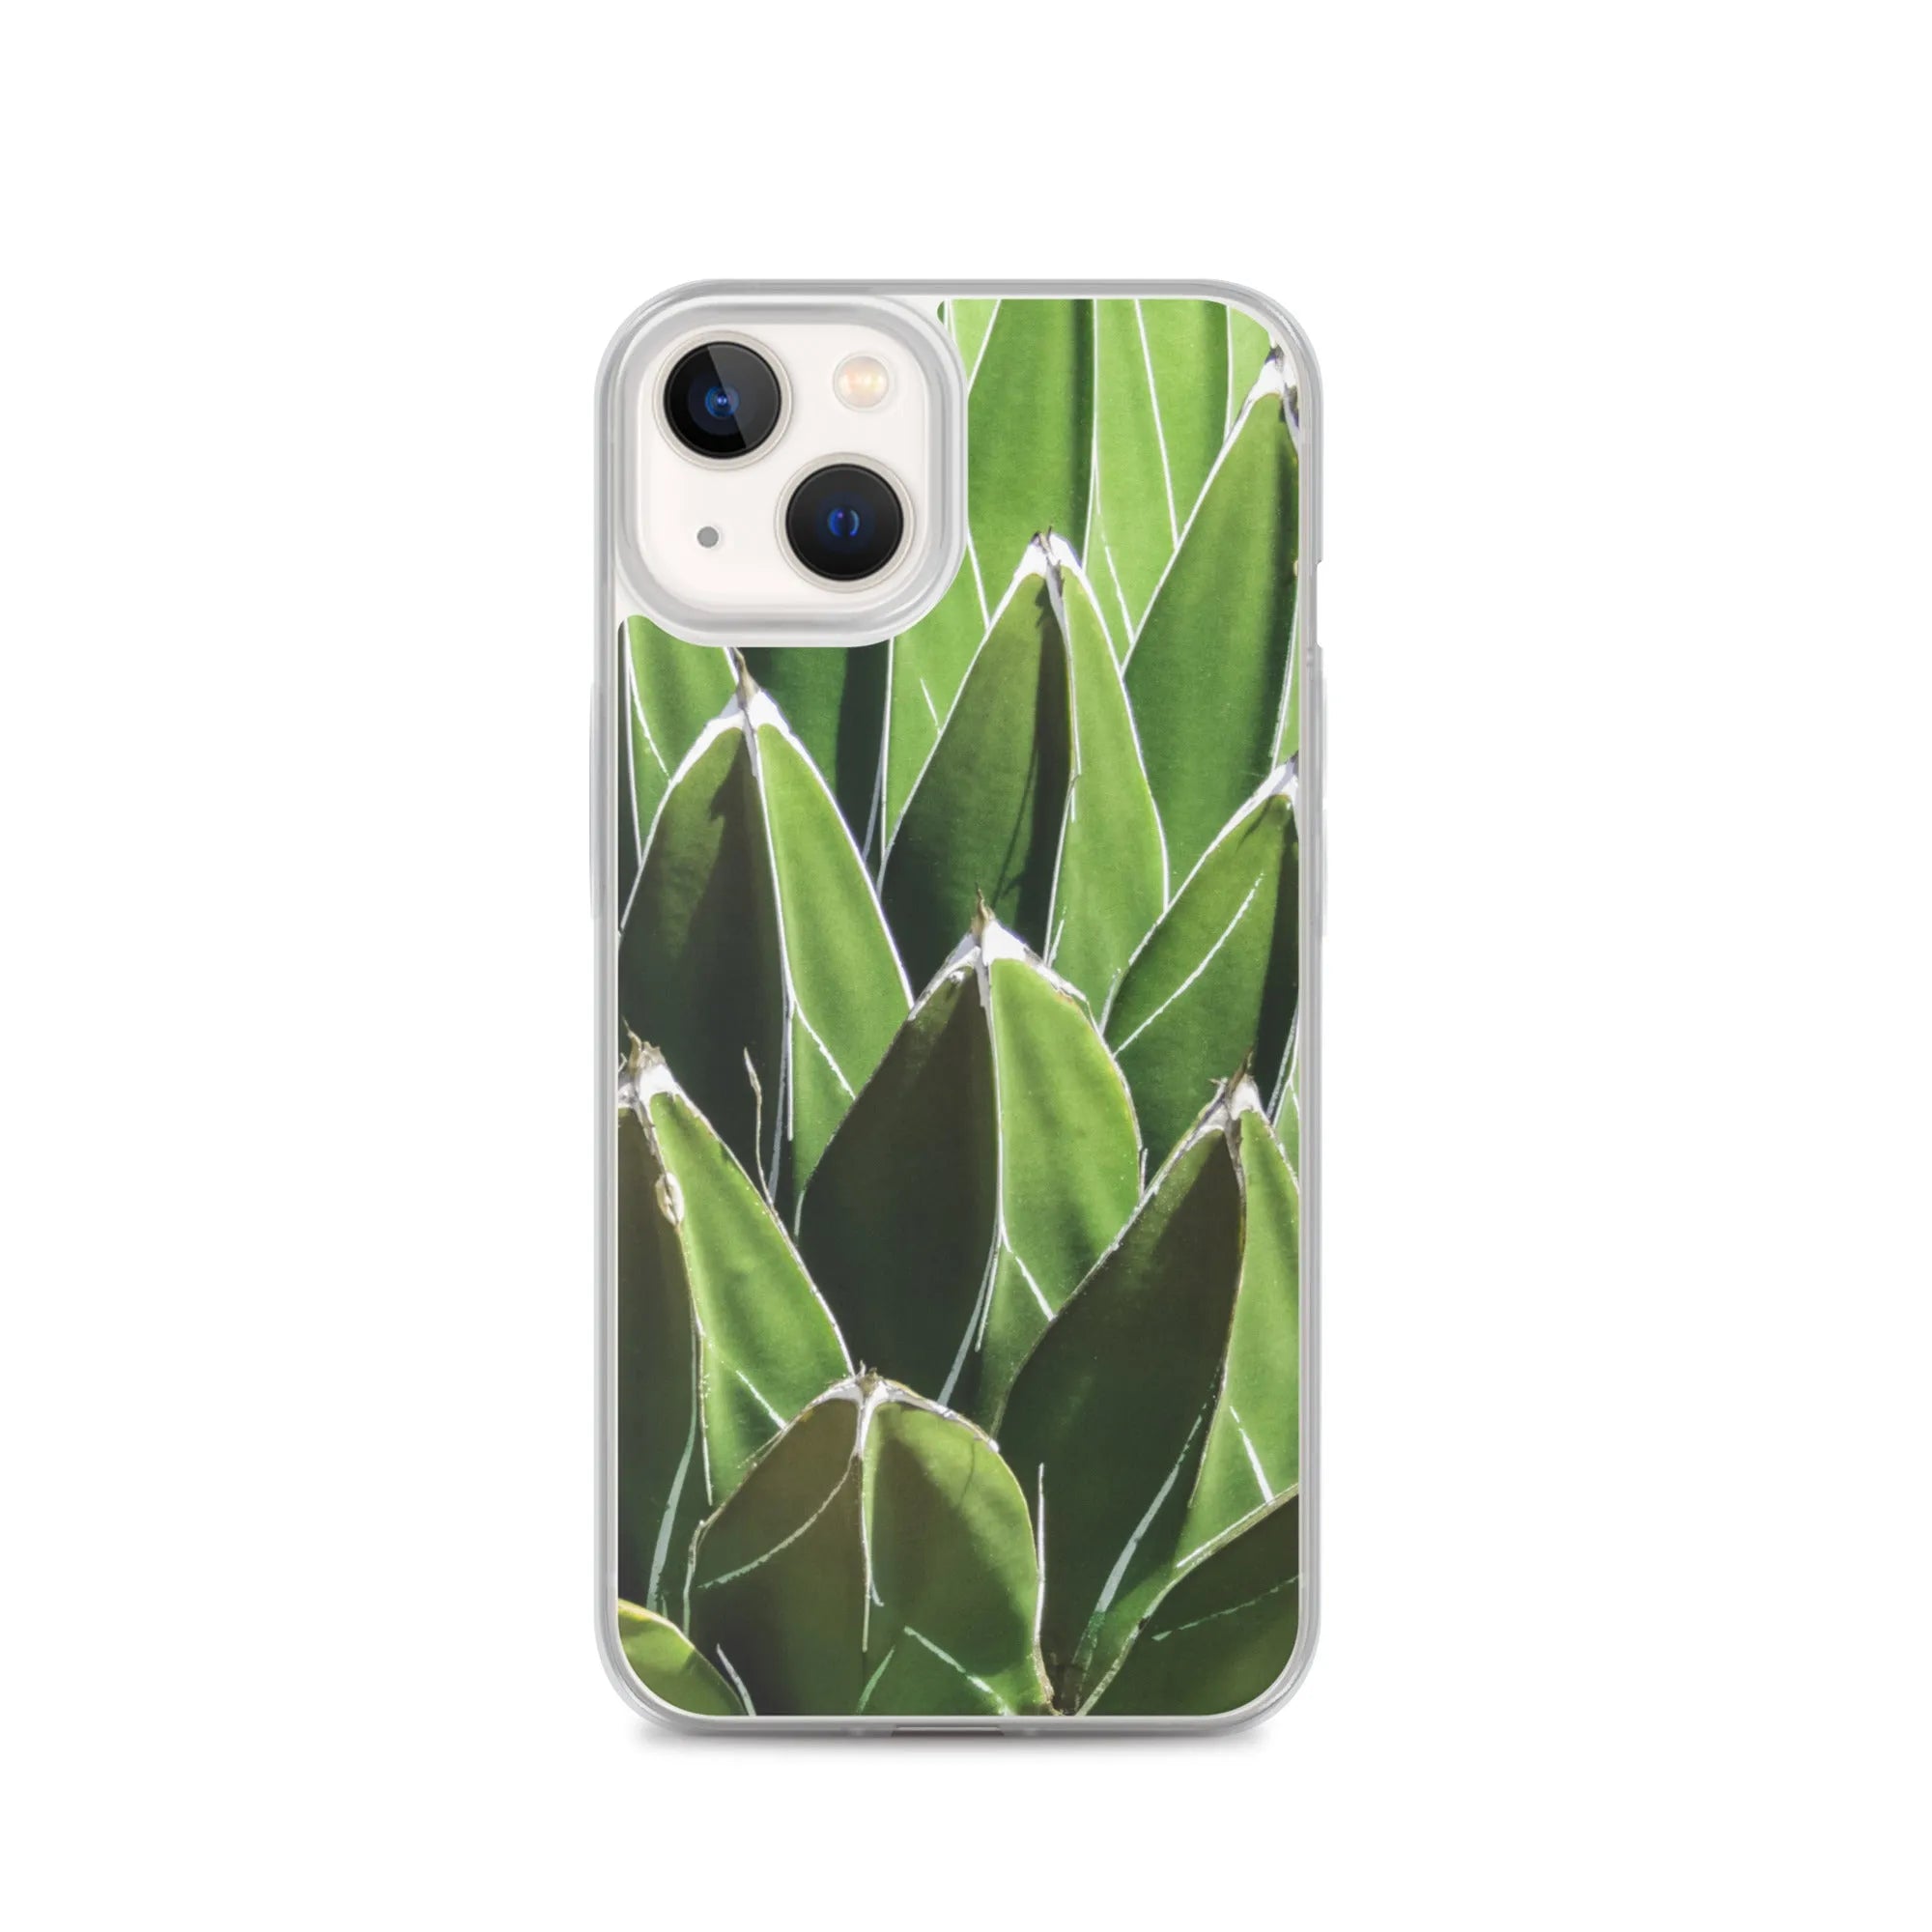 Decked Out Botanical Art Iphone Case - Iphone 13 - Mobile Phone Cases - Aesthetic Art